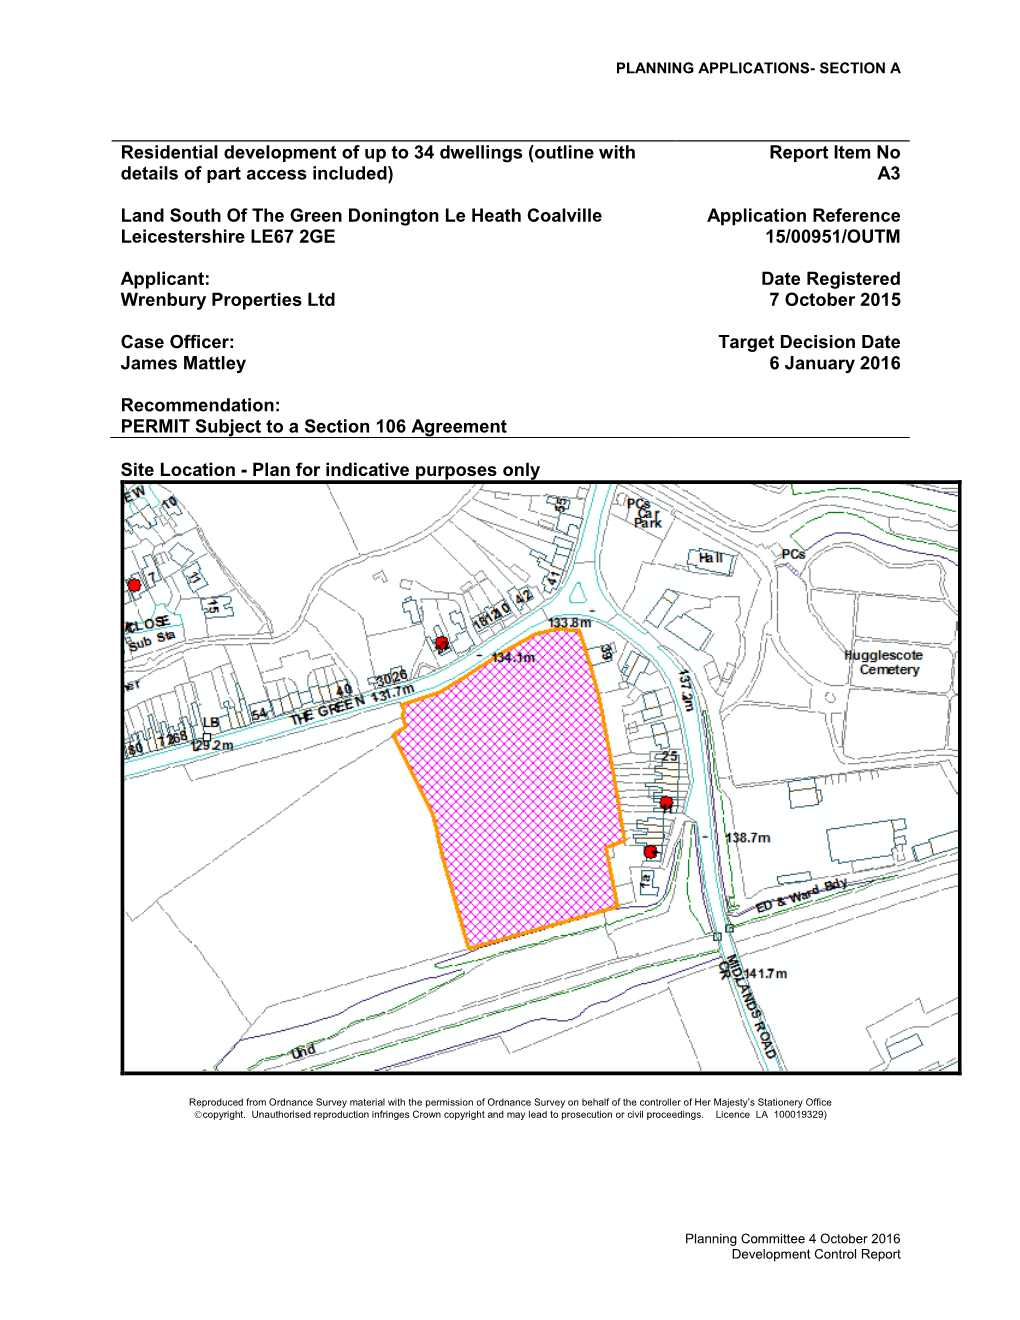 Residential Development of up to 34 Dwellings (Outline with Details of Part Access Included) on Land to the South of the Green, Donington Le Heath